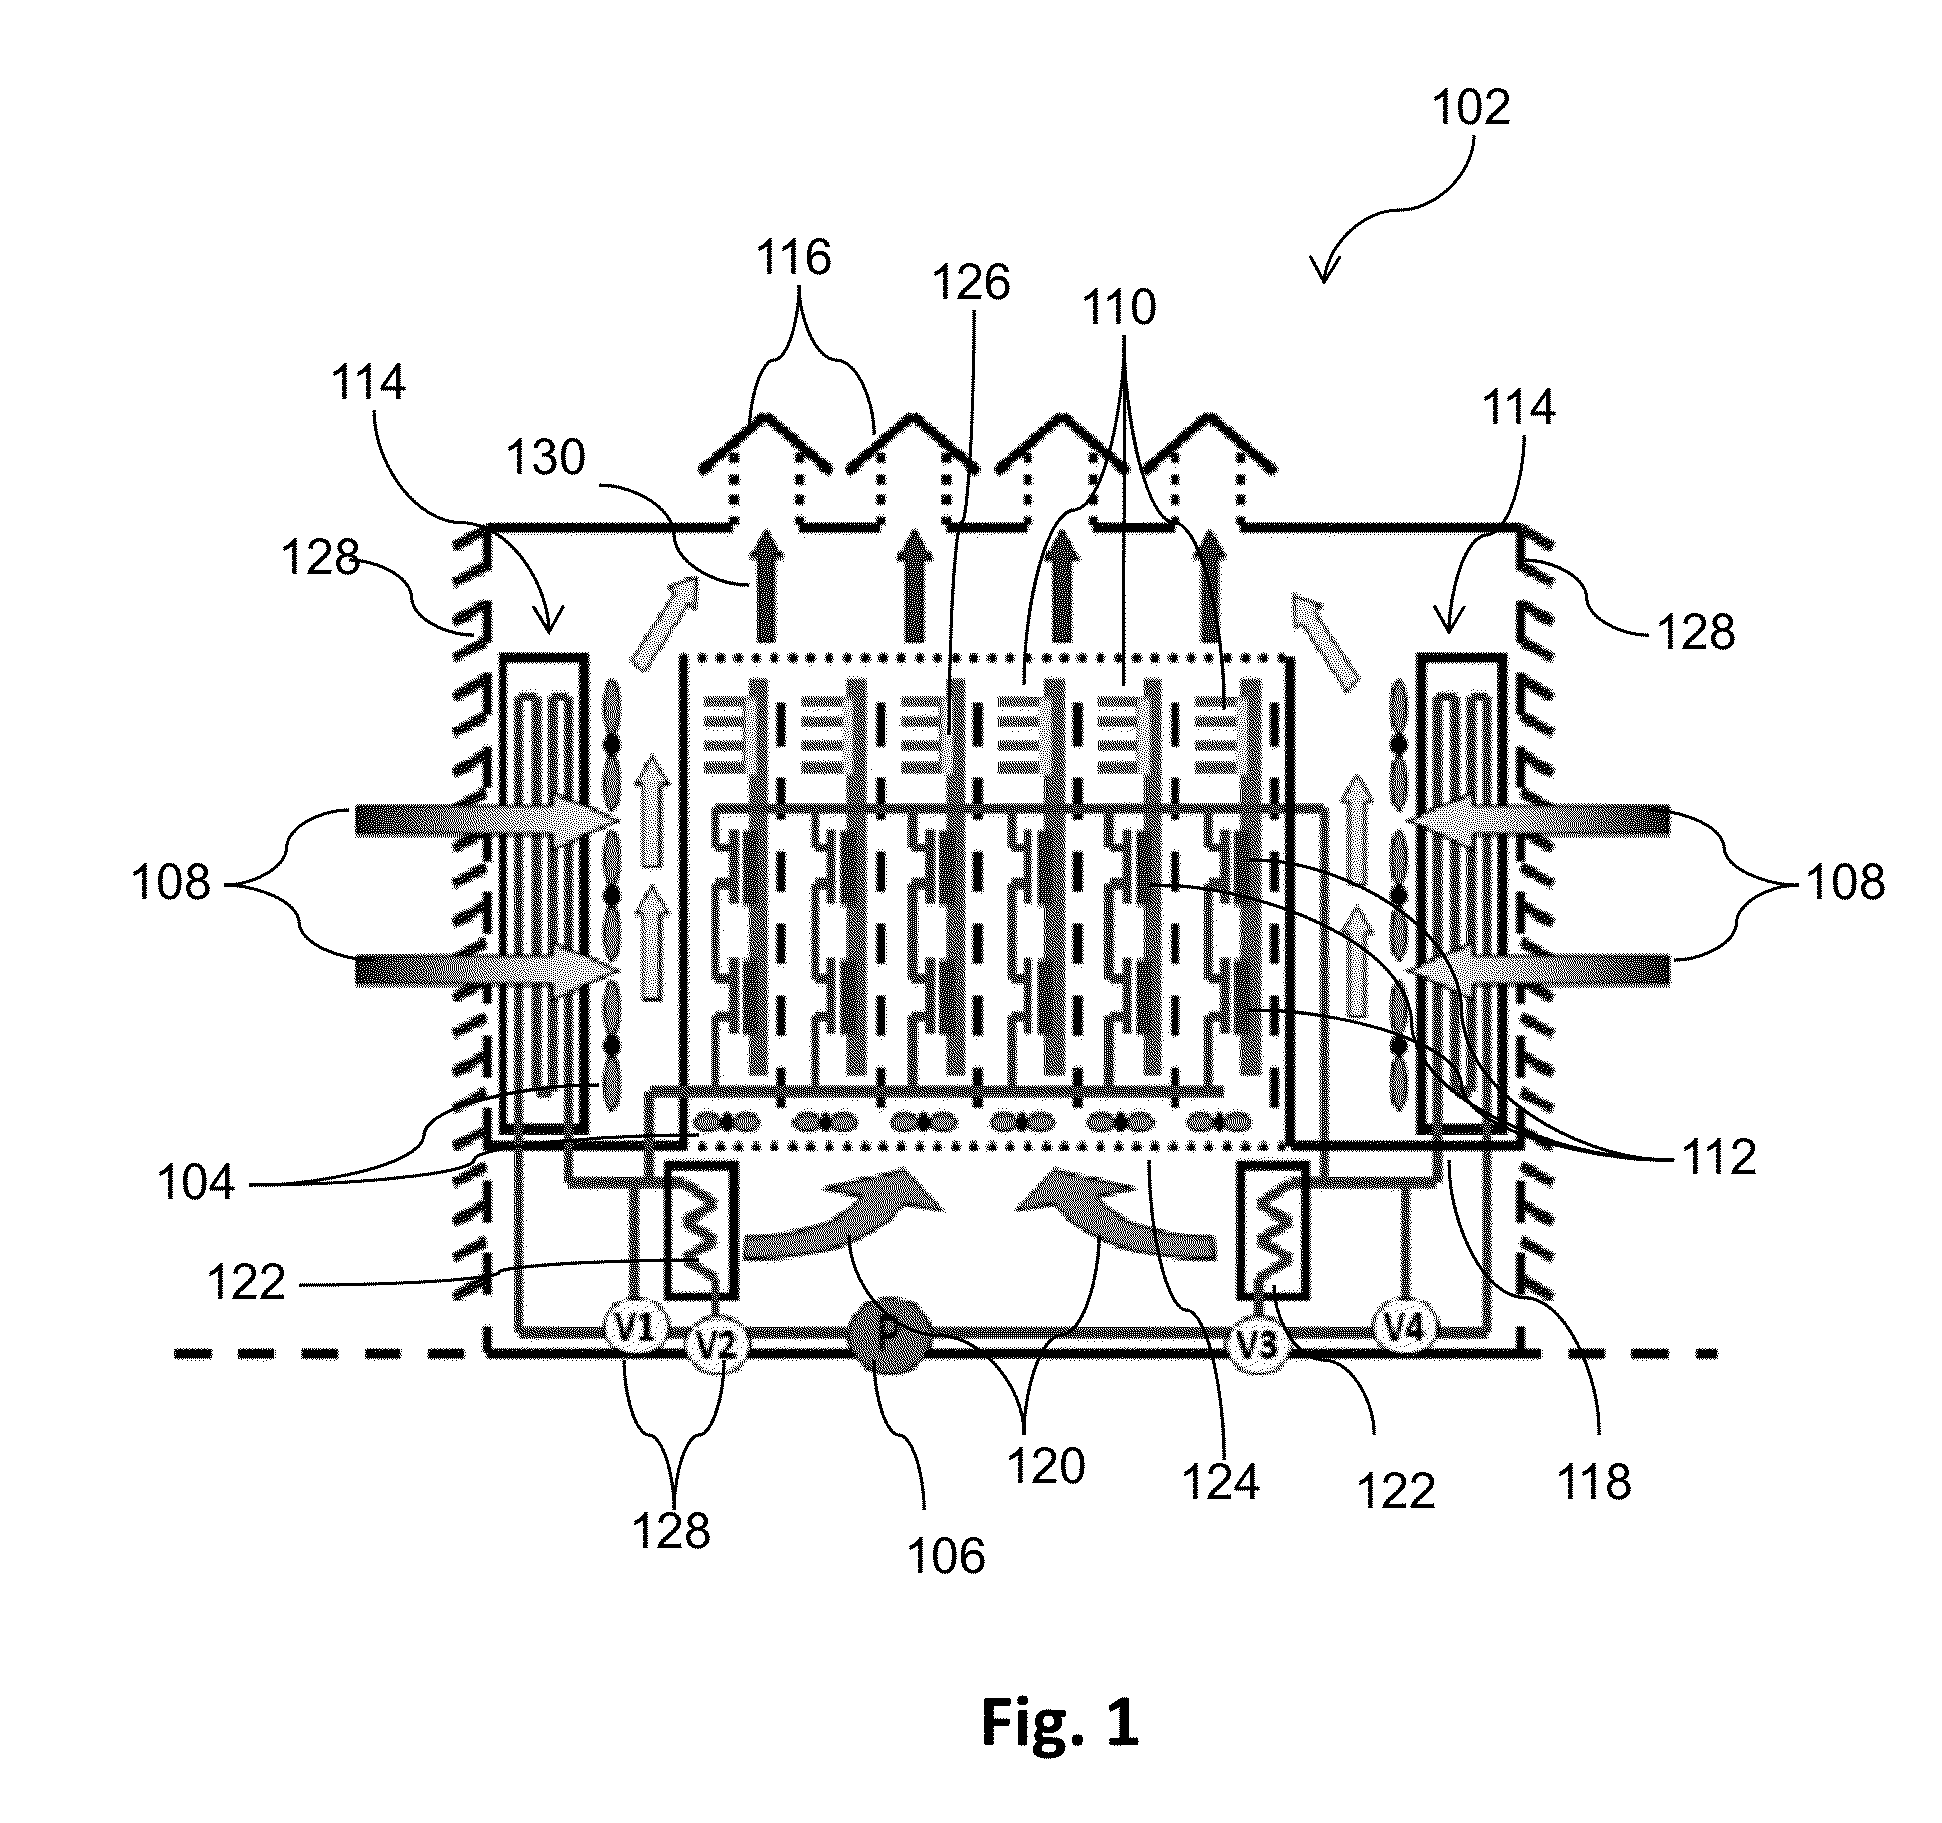 Server cooling system without the use of vapor compression refrigeration